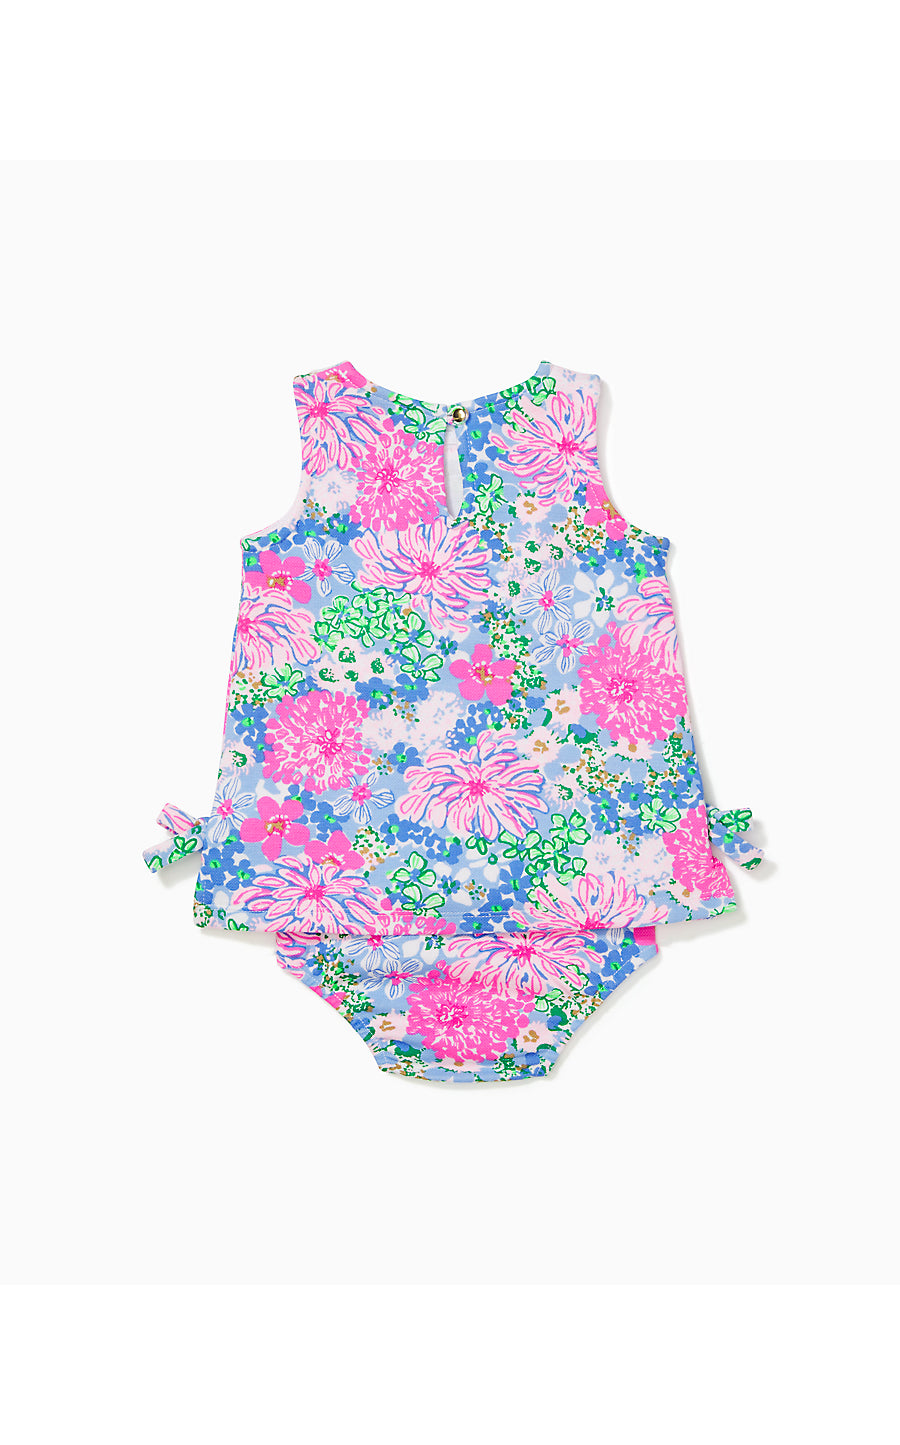 BABY LILLY KNIT SHIFT - LIL SOIREE ALL DAY